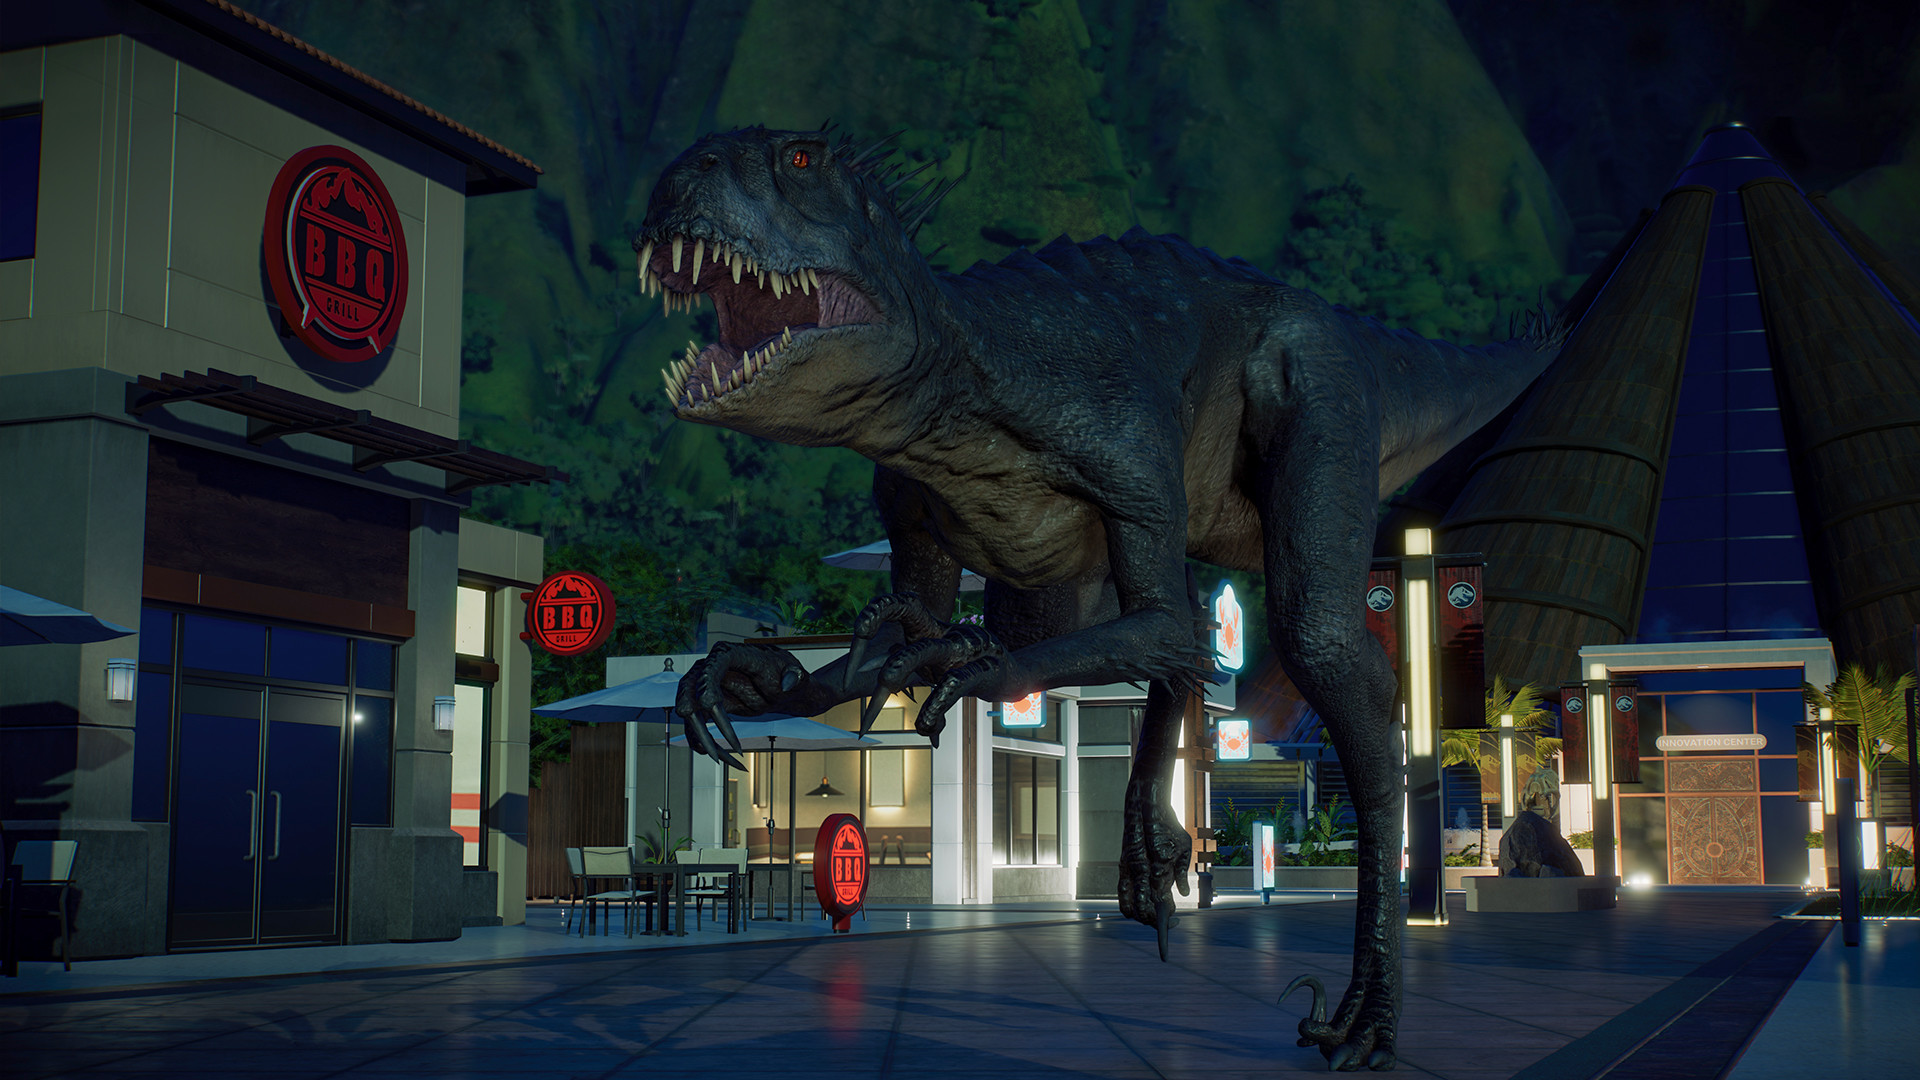 Jurassic World Evolution 2 – Camp Cretaceous Dinosaur Pack DLC releases in March